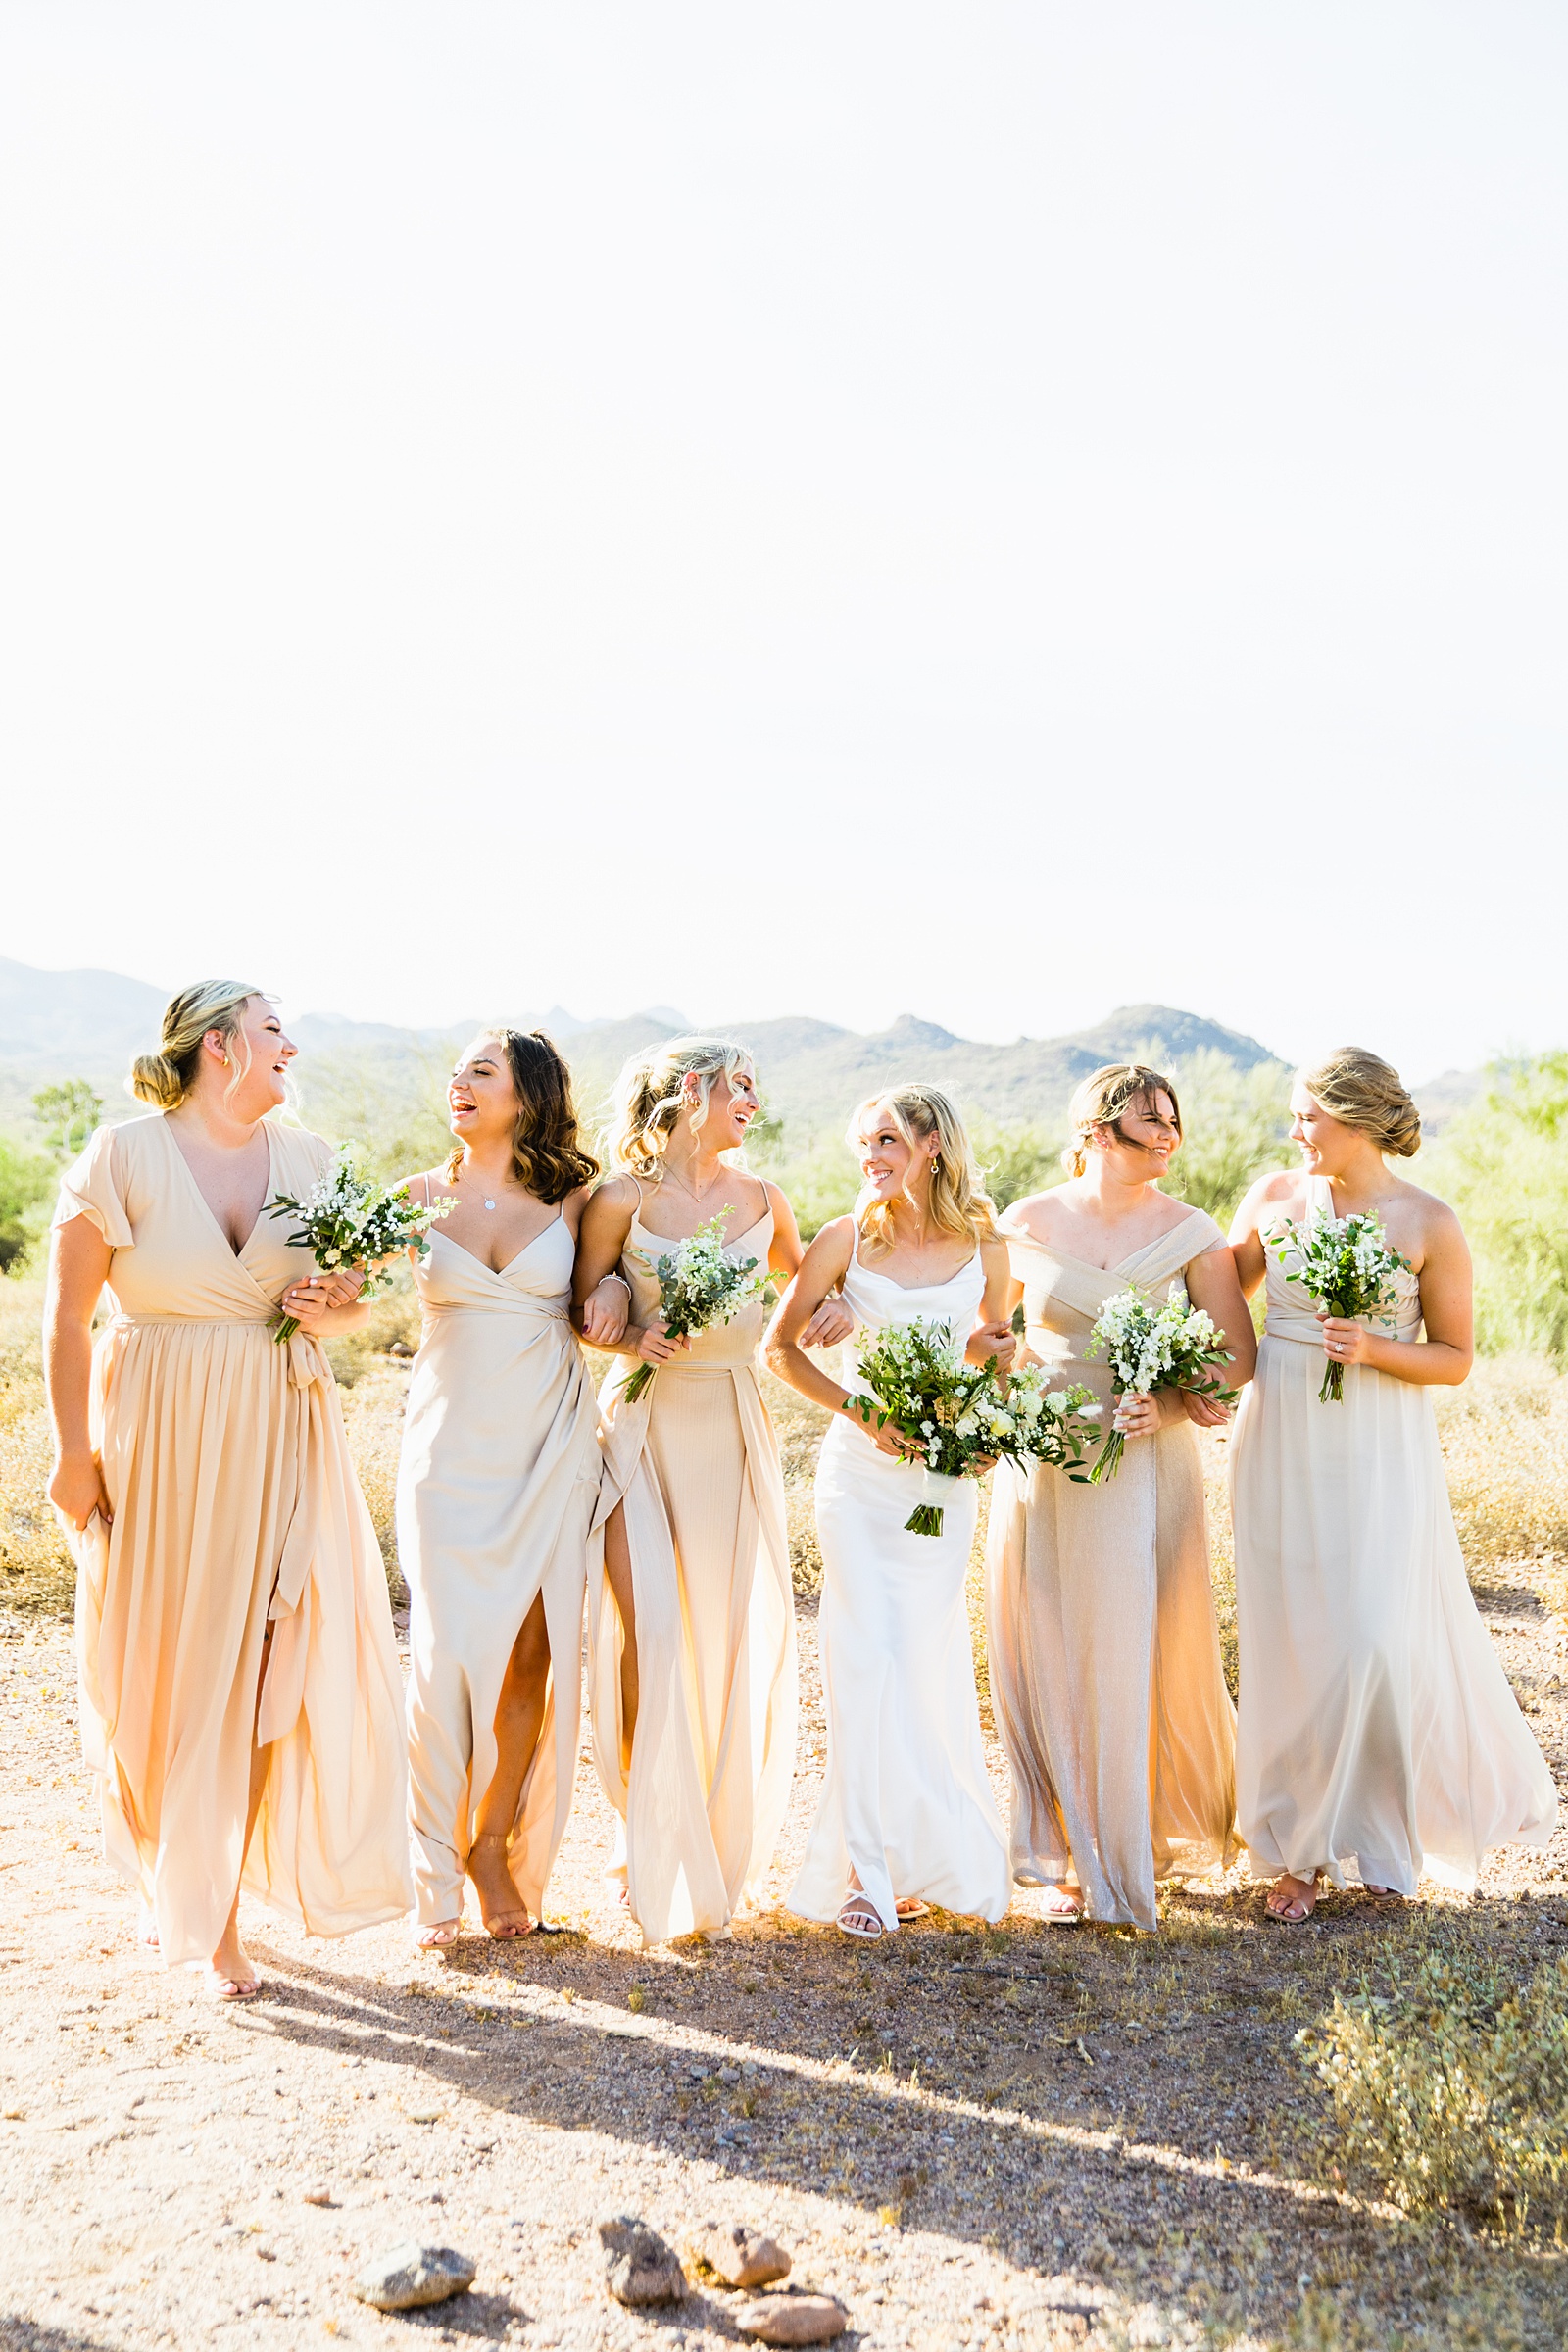 Bride and bridesmaids laughing together at Superstition Mountain Micro wedding by Lost Dutchman wedding photographer PMA Photography.